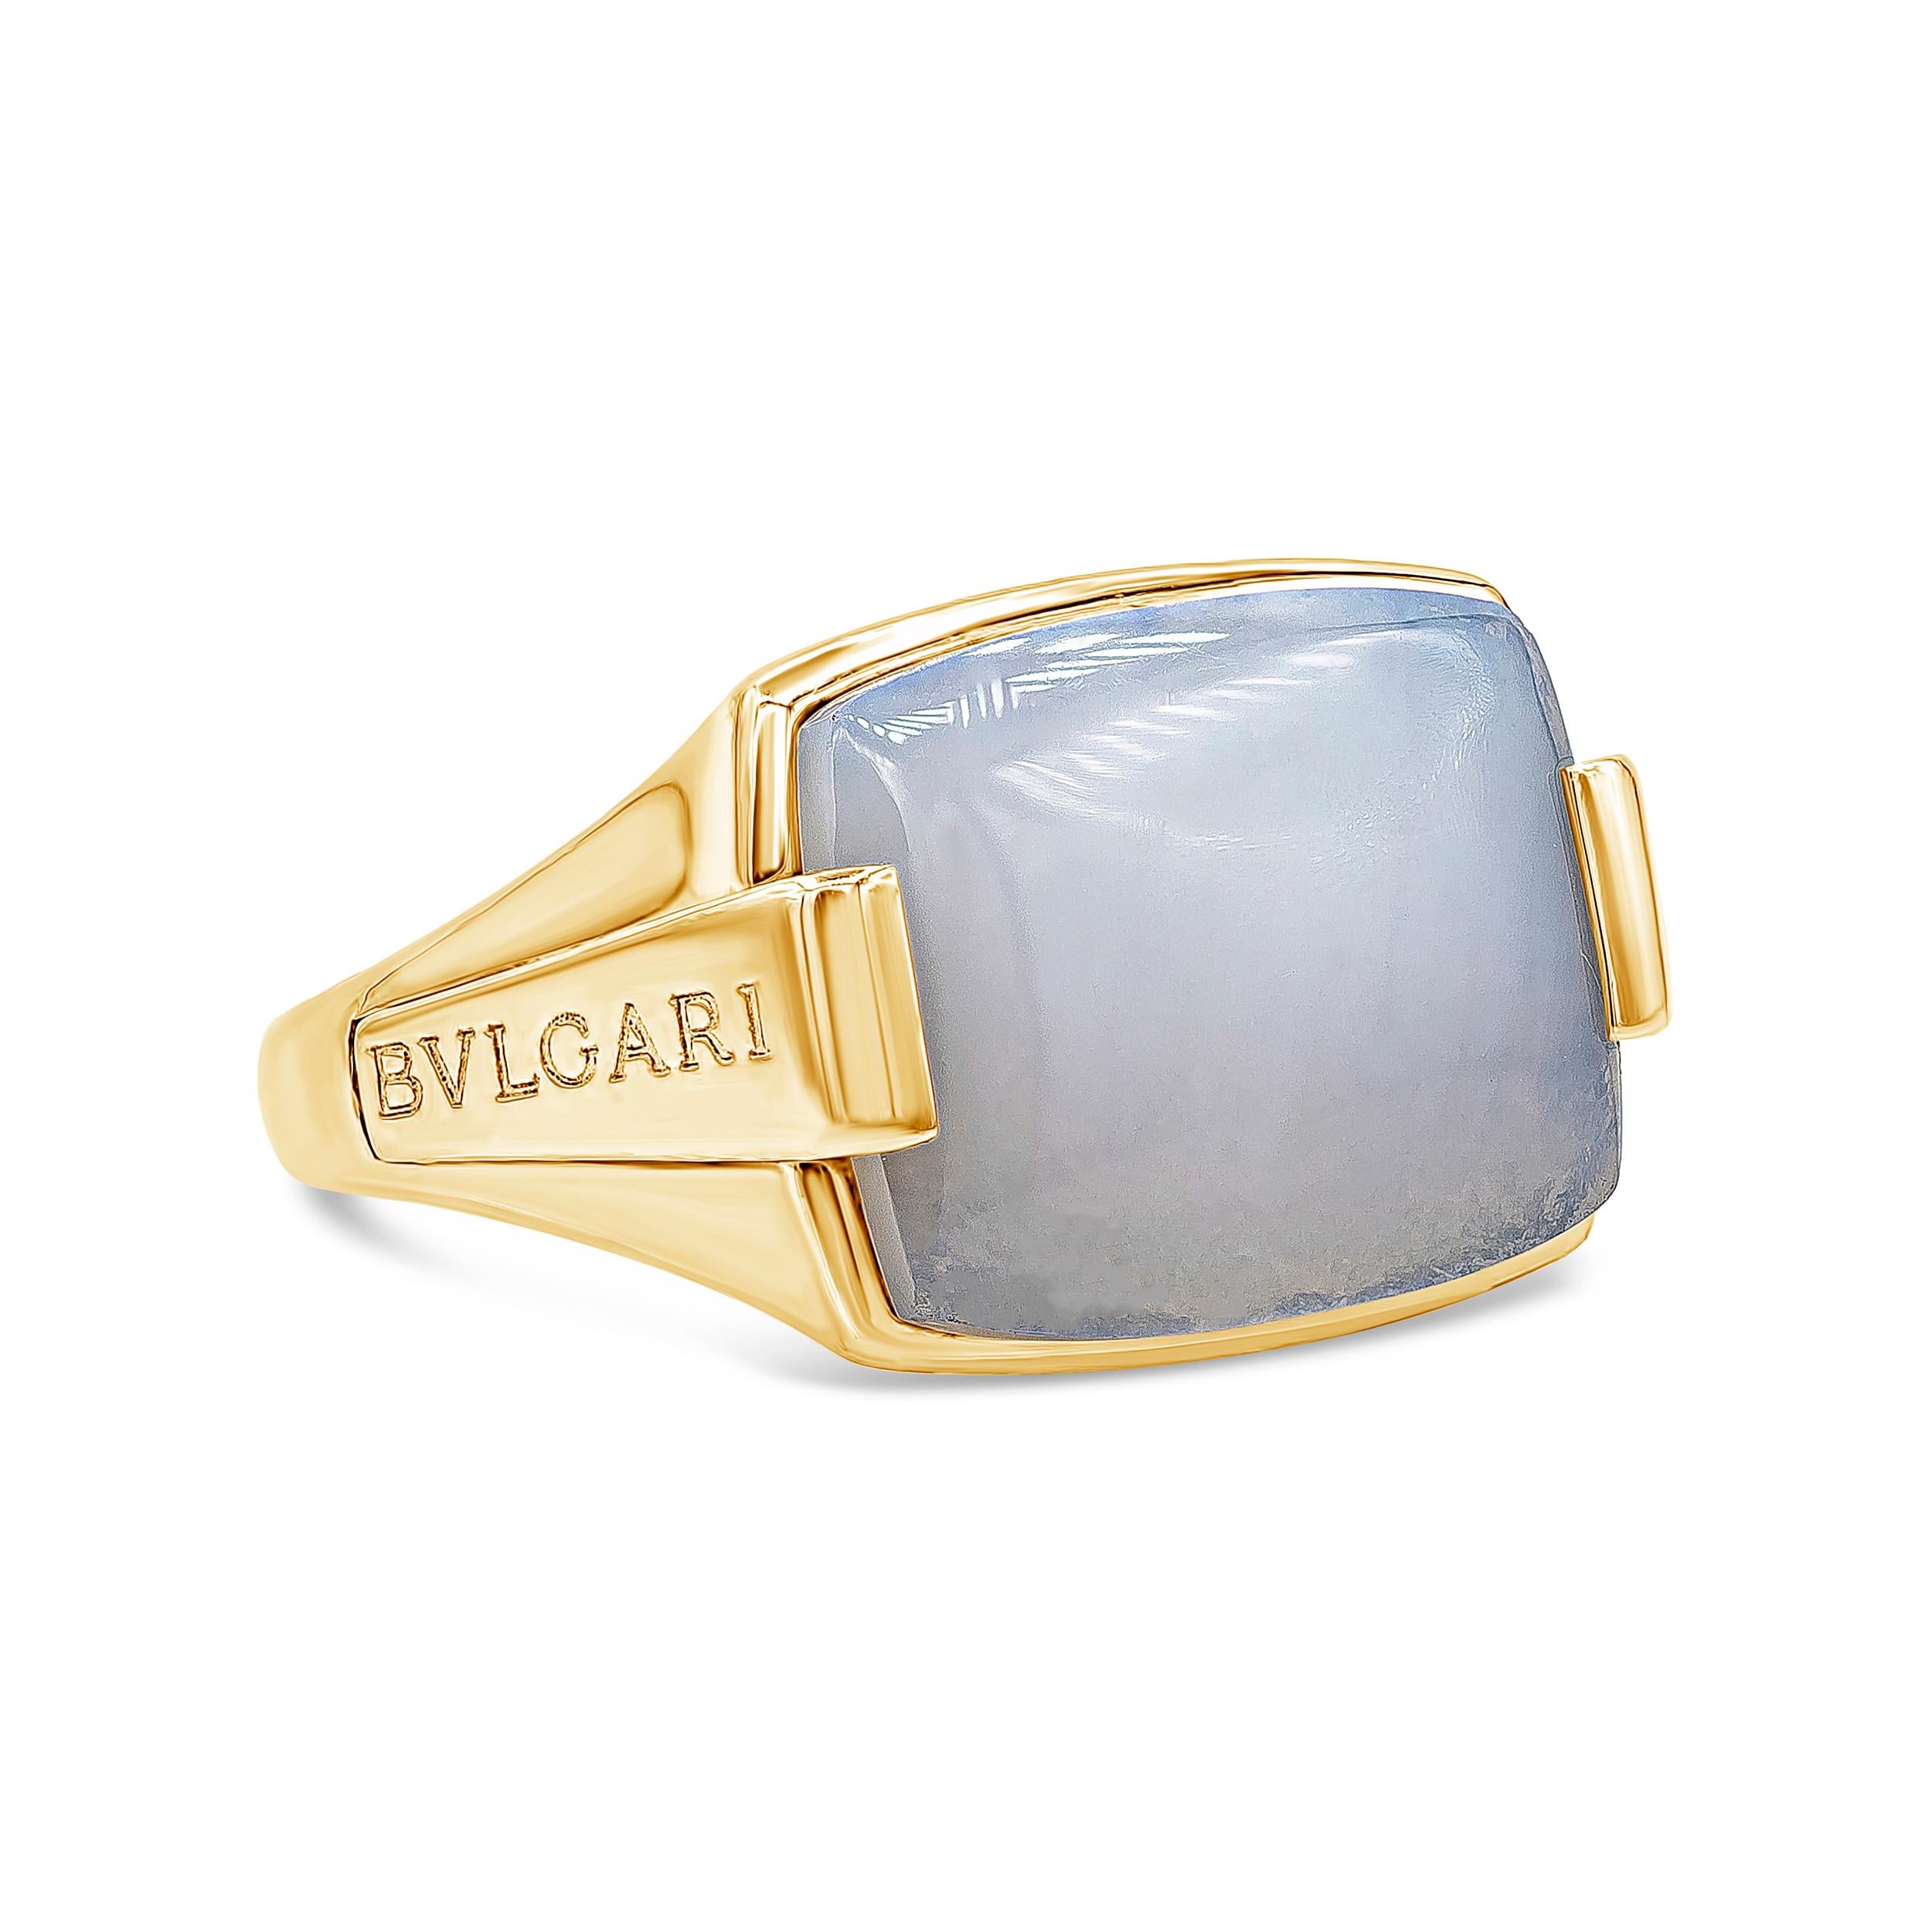 A fashionable ring showcasing a square shape moonstone, set in an everlasting 18 karat yellow gold setting. Made and signed Bulgari. Size 5.5 US (sizable upon request).